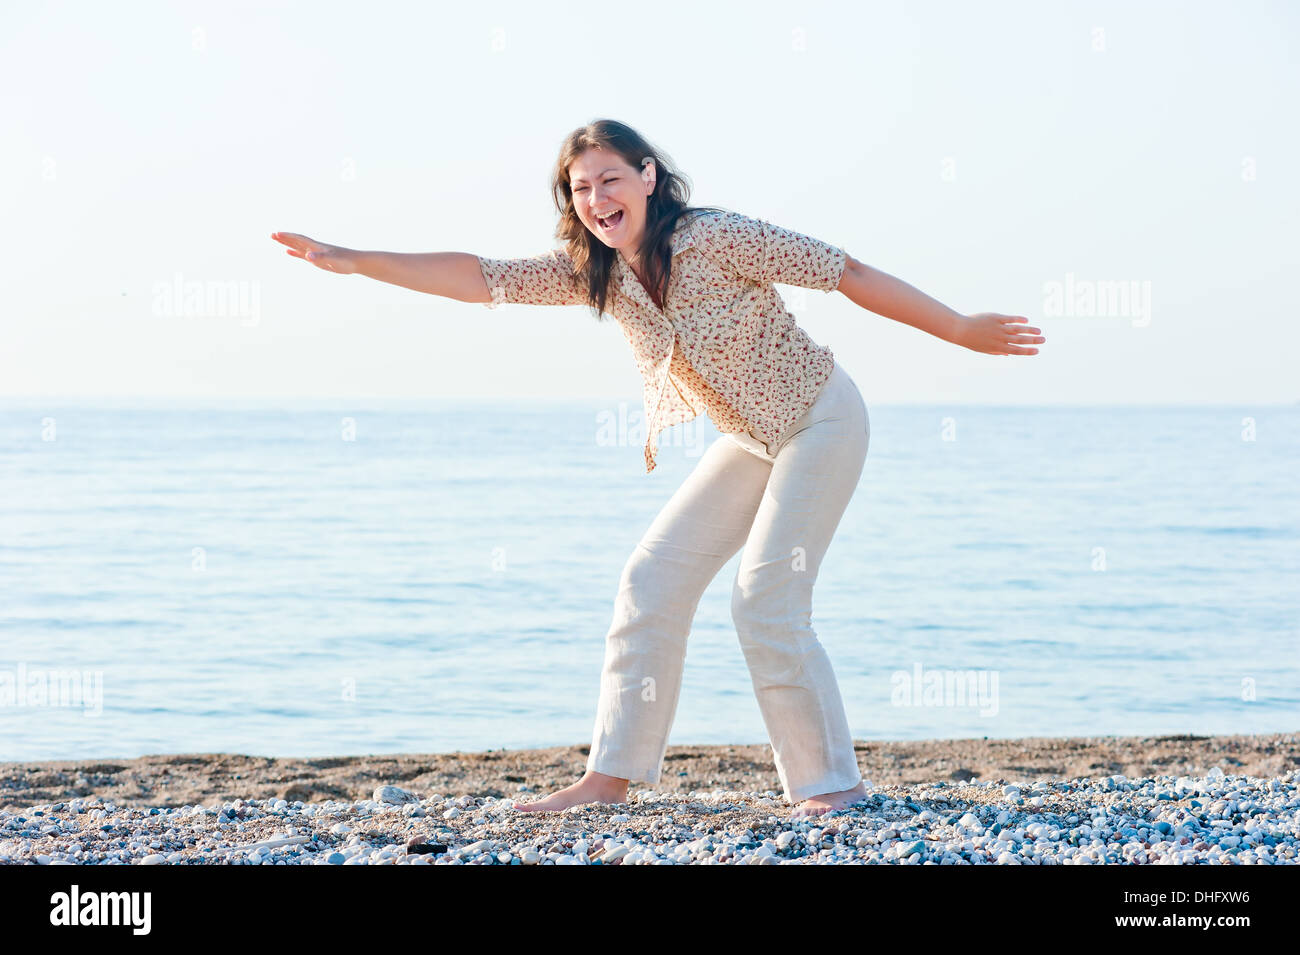 young girl on the beach fooling around Stock Photo